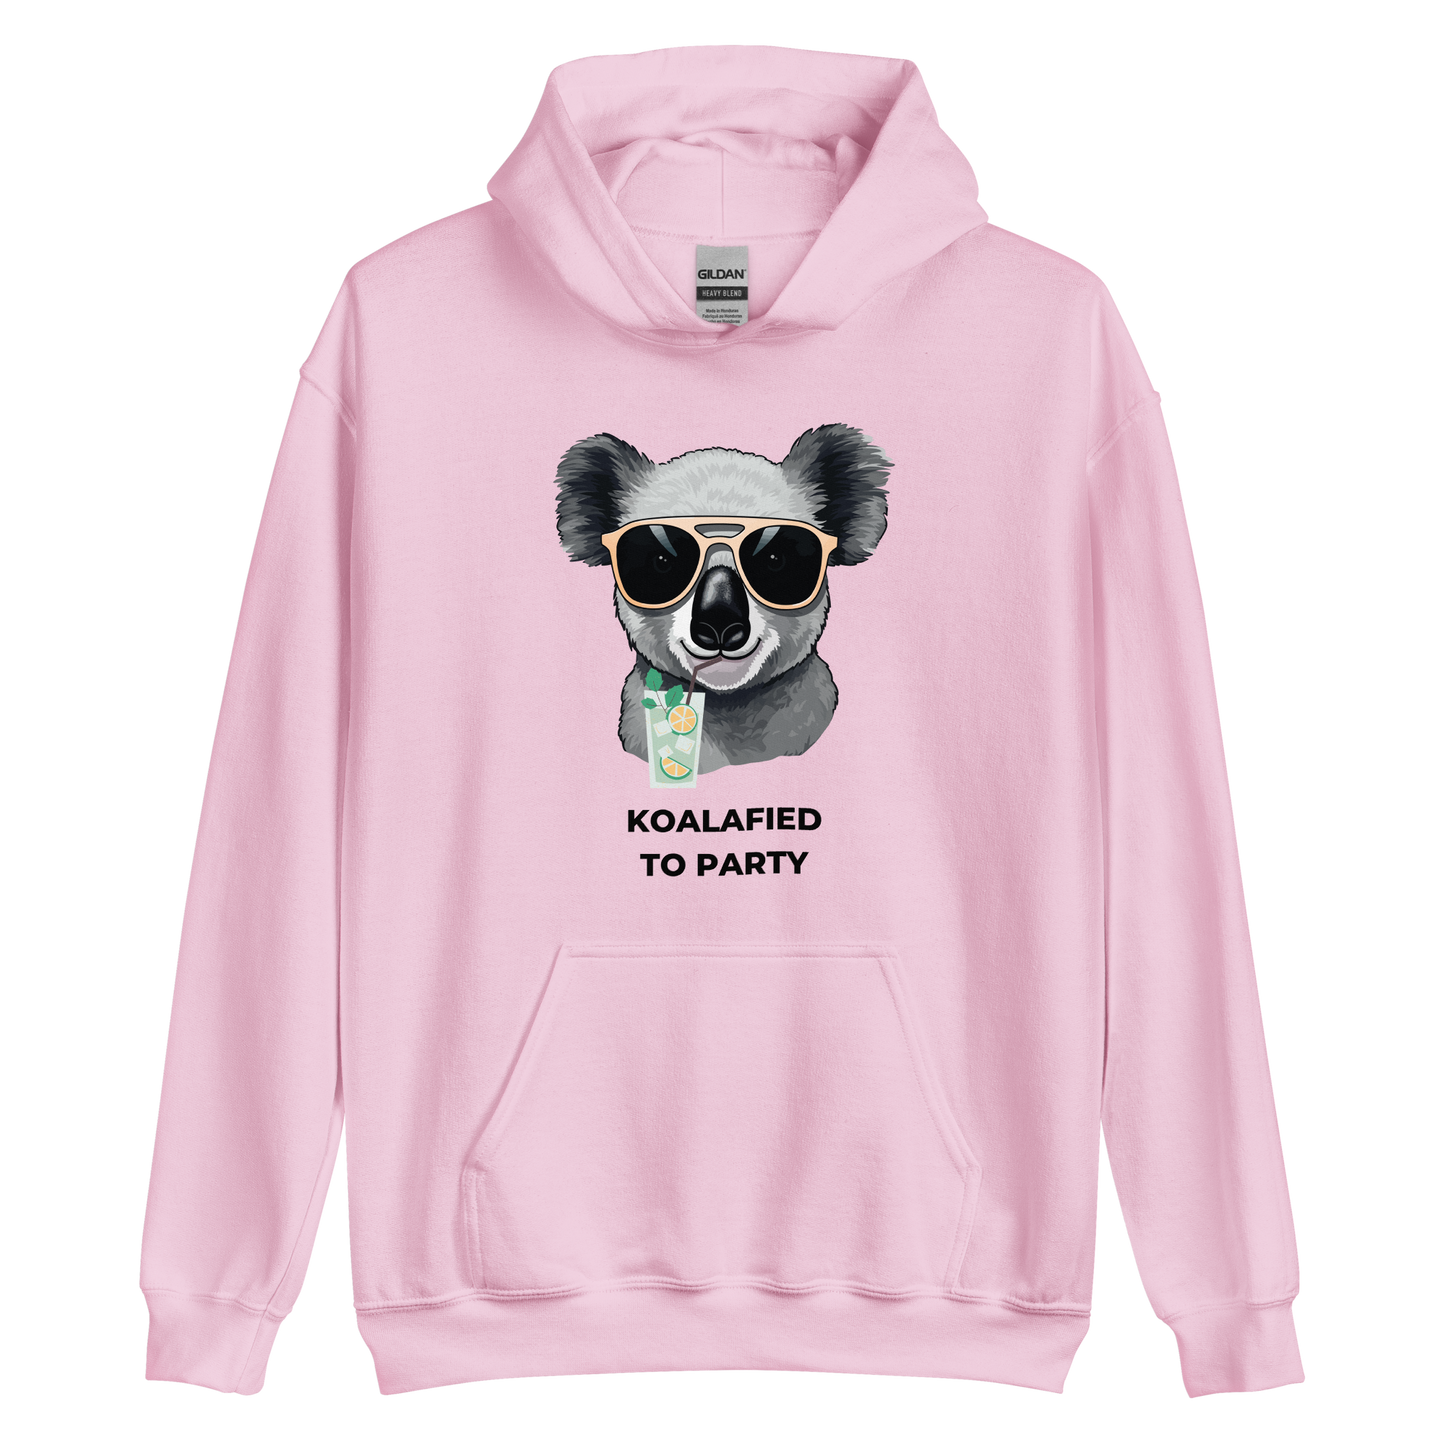 Light Pink Koala Hoodie featuring a captivating Koalafied To Party graphic on the chest - Funny Graphic Koala Hoodies - Boozy Fox